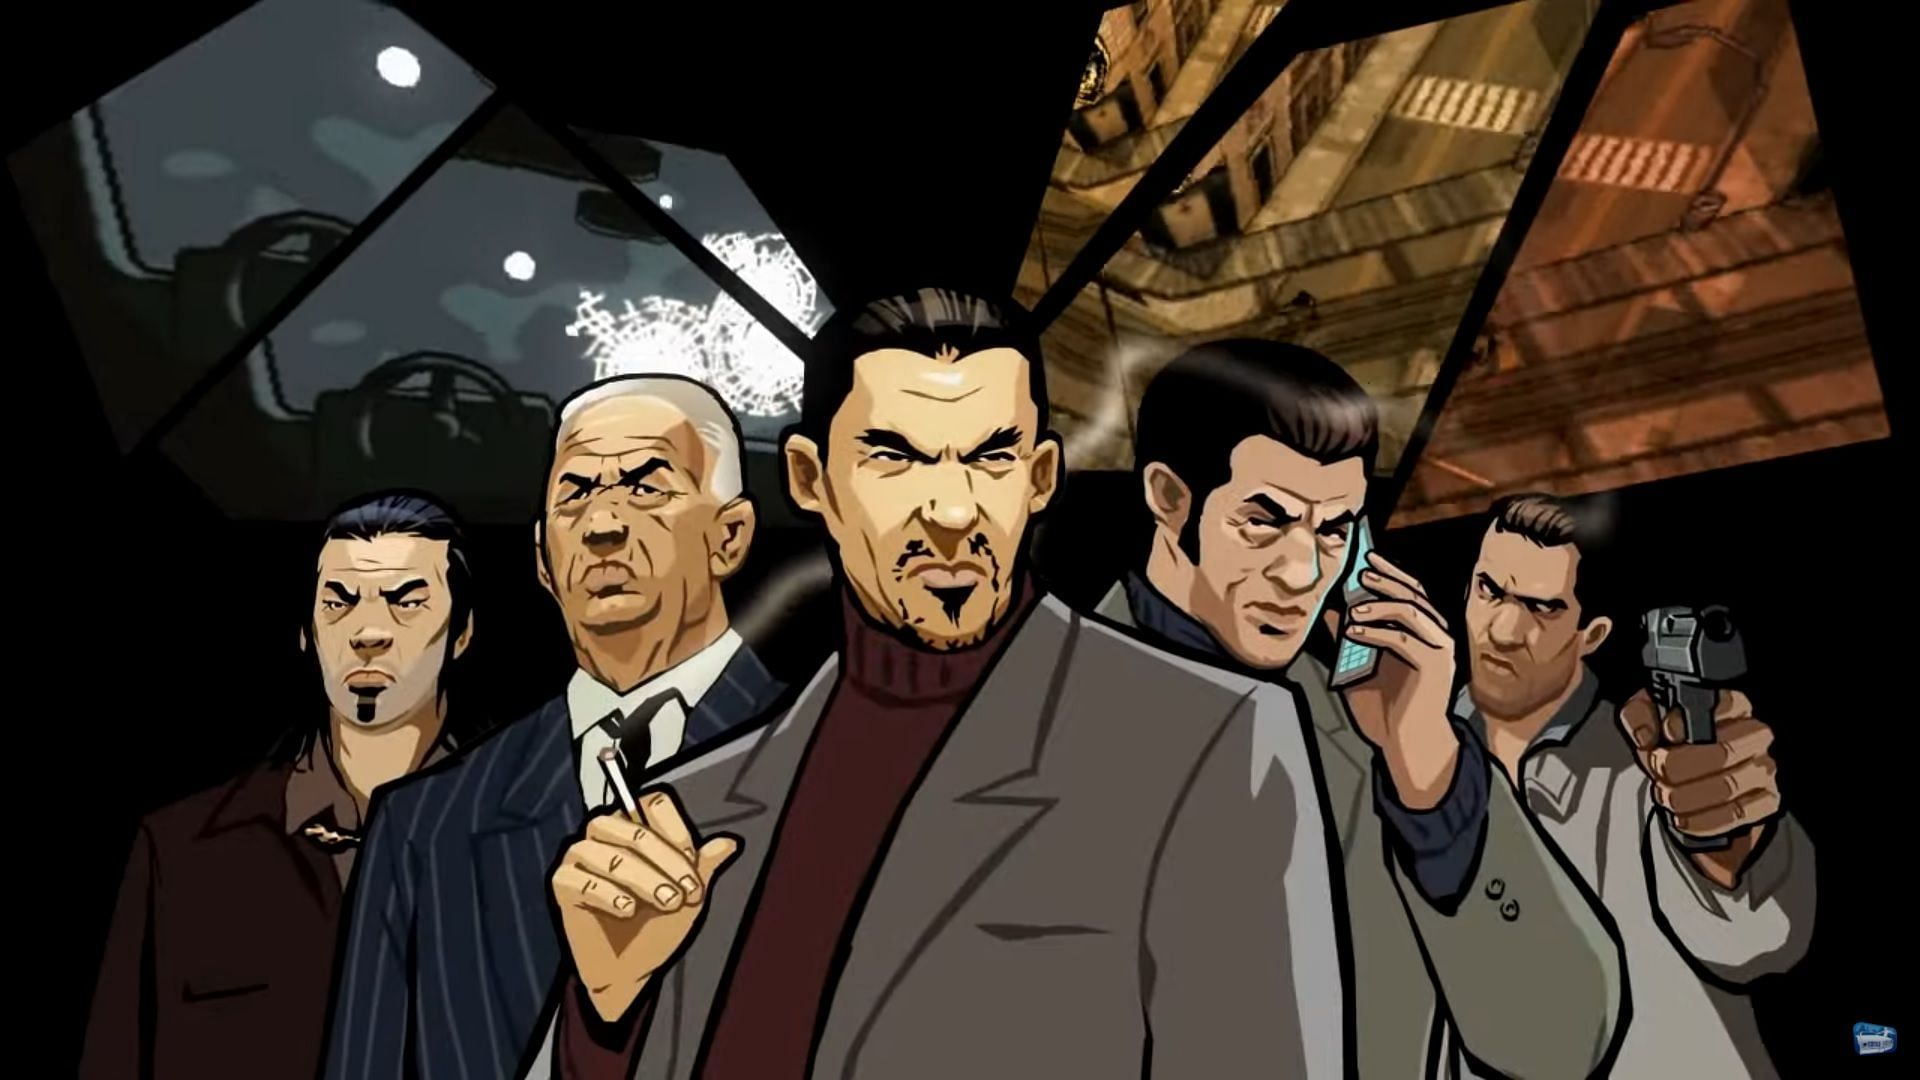 GTA Chinatown Wars was released on March 17, 2009. (Image via GTA Series Videos/YouTube)